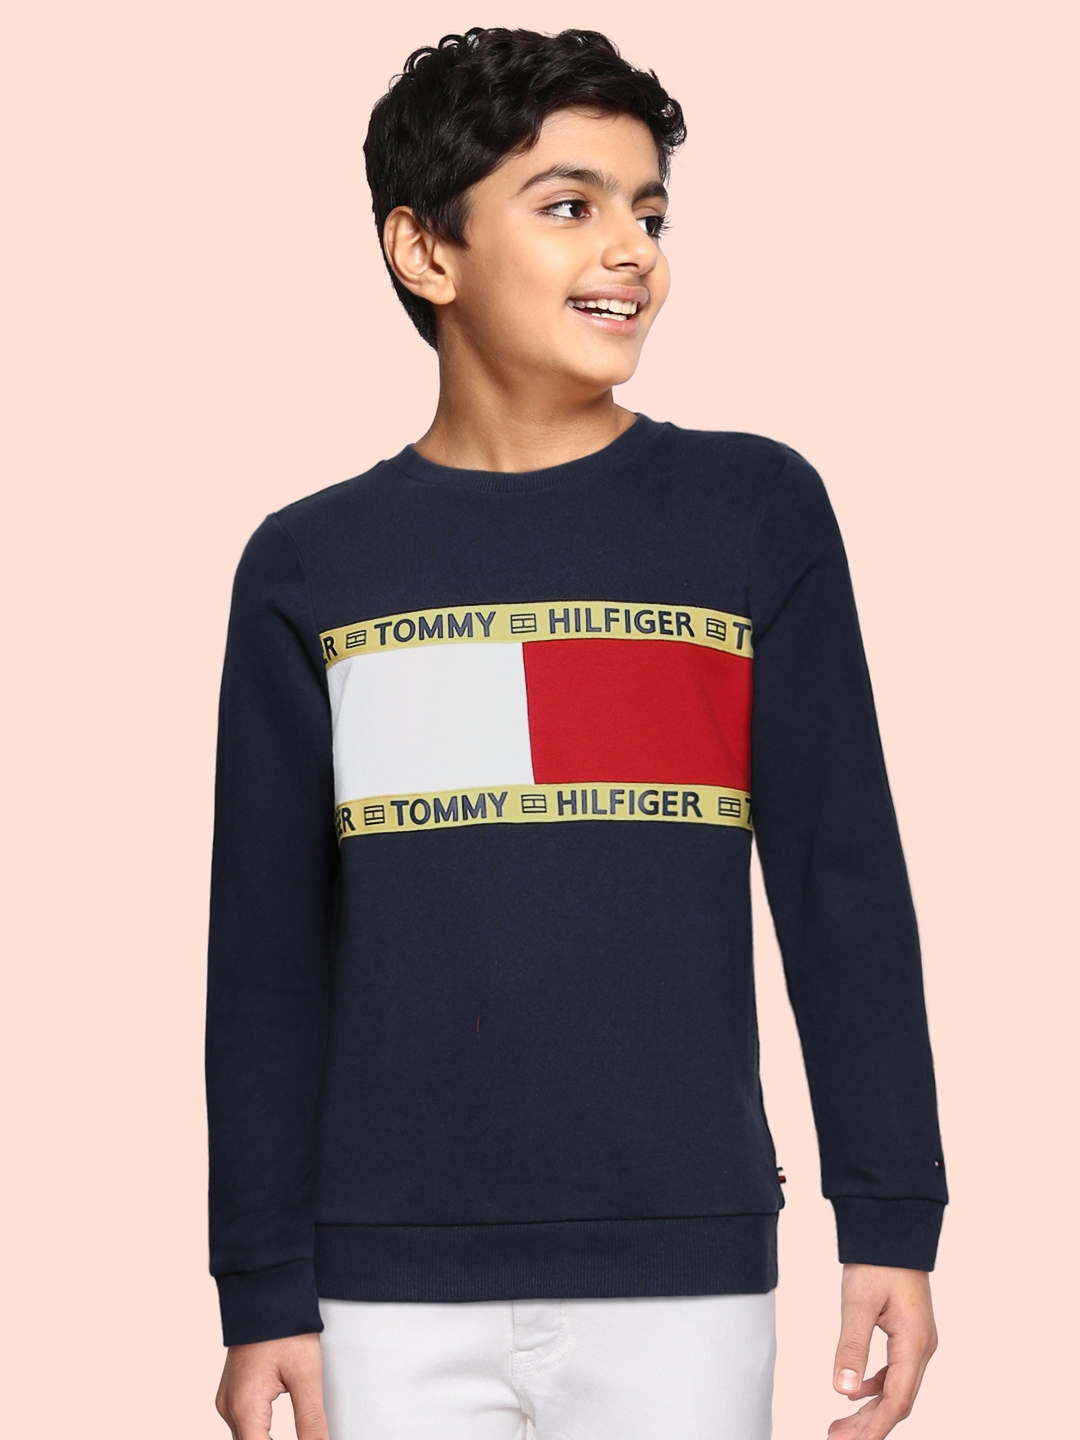 Buy Tommy Hilfiger Unisex Kids Blue & Red Colourblocked Pure Cotton ...